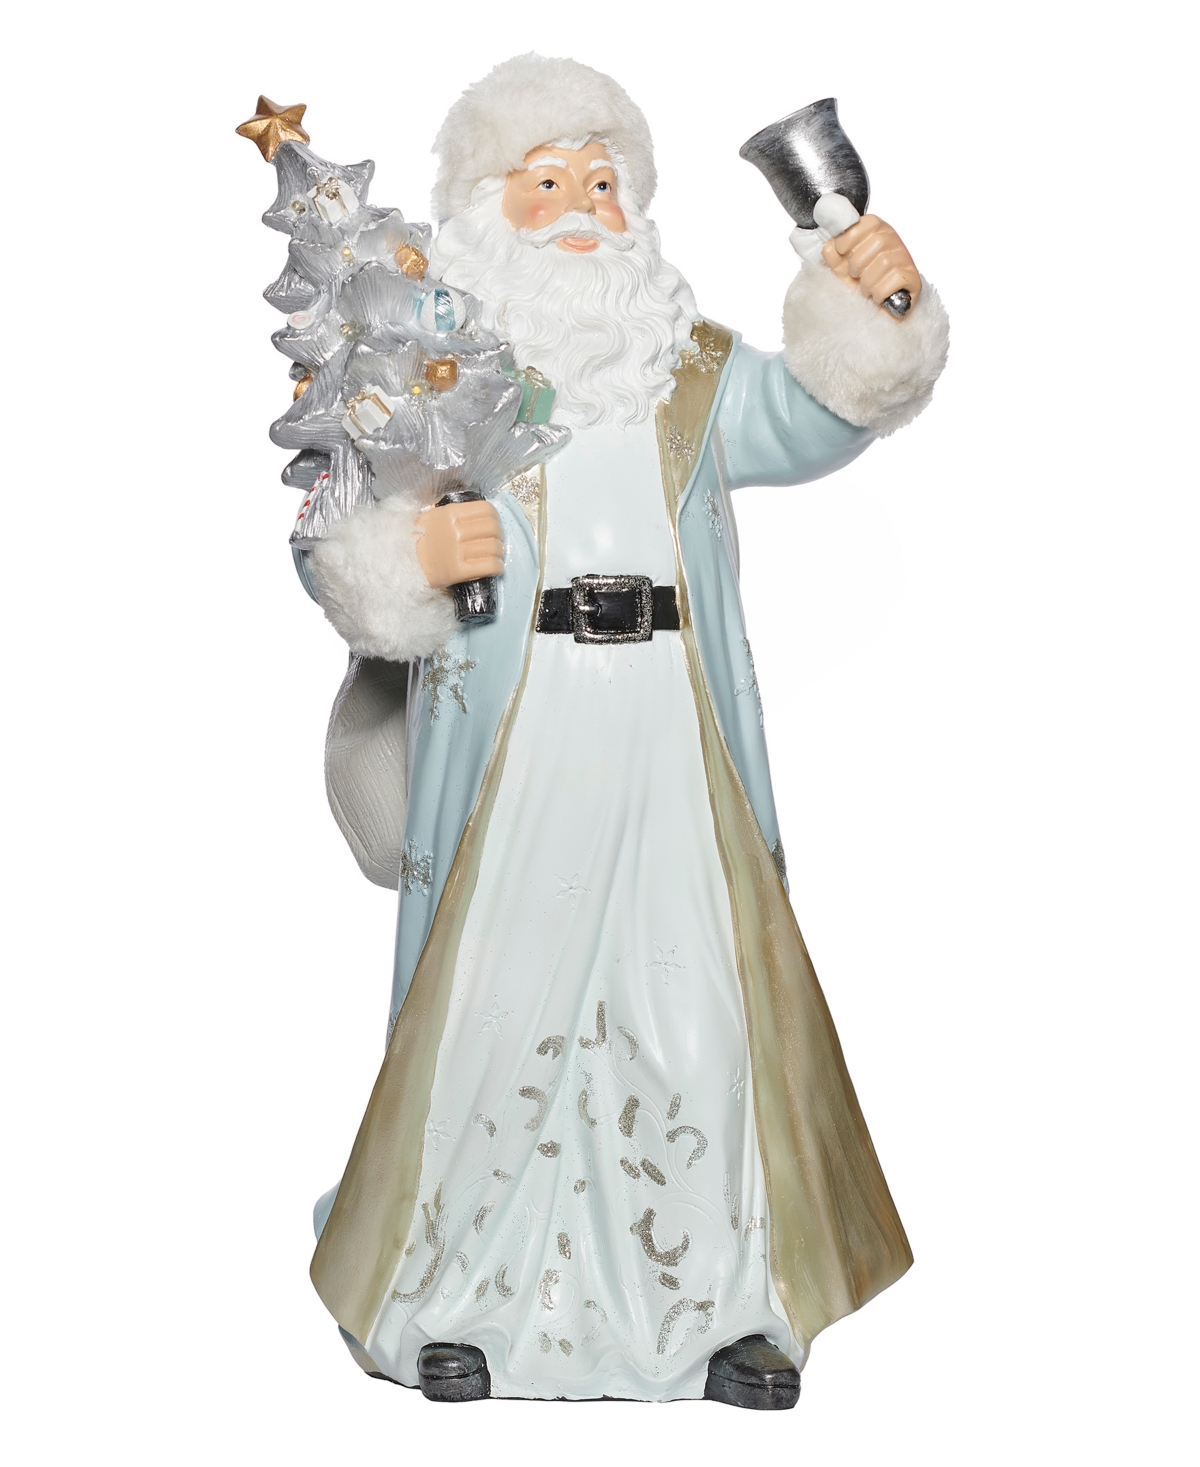 Roman 16.7" H Light Emitting Diode (led) Santa With Tree In Multi Color